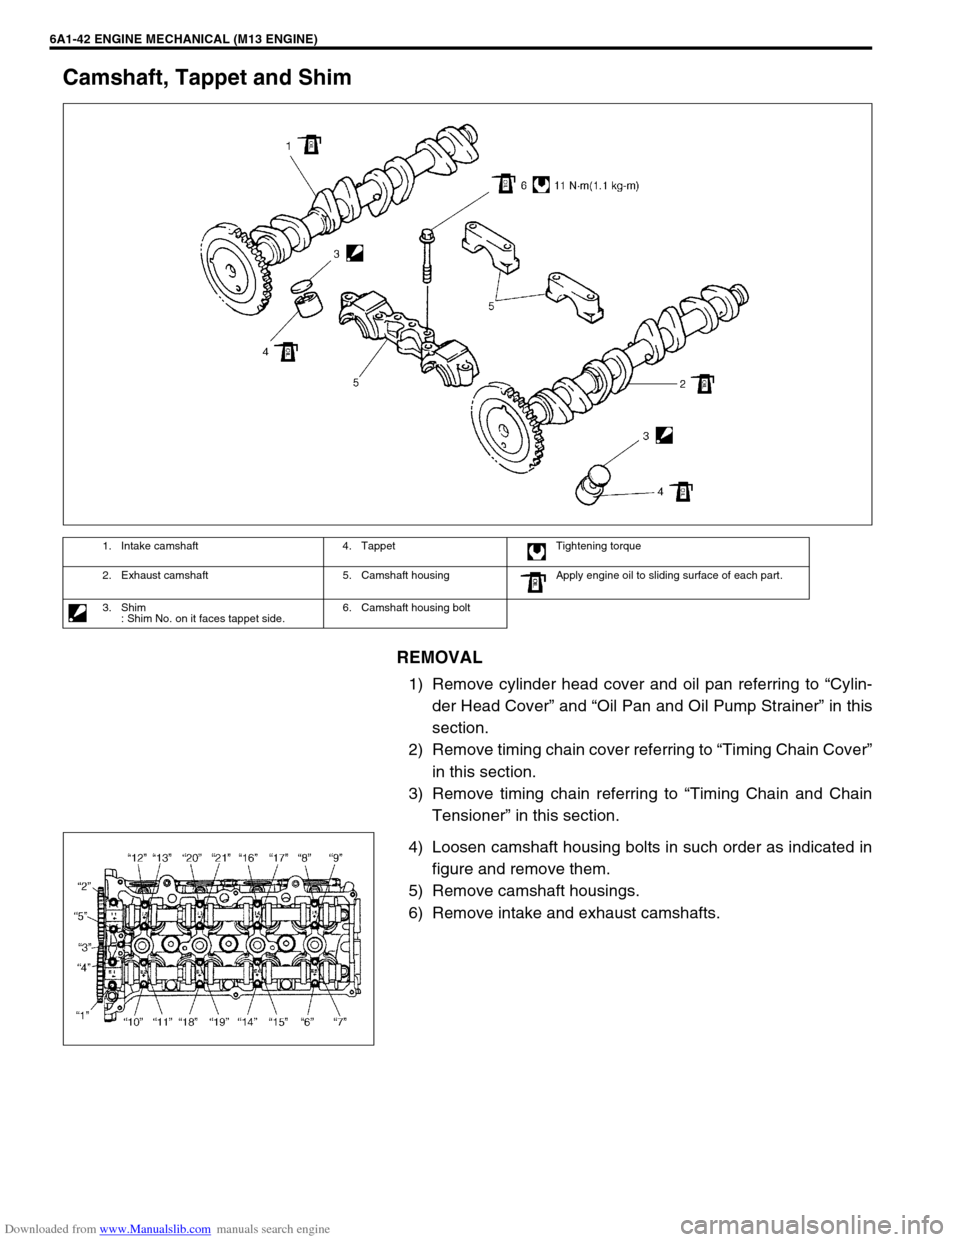 SUZUKI JIMNY 2005 3.G Service Service Manual Downloaded from www.Manualslib.com manuals search engine 6A1-42 ENGINE MECHANICAL (M13 ENGINE)
Camshaft, Tappet and Shim
REMOVAL
1) Remove cylinder head cover and oil pan referring to “Cylin-
der He